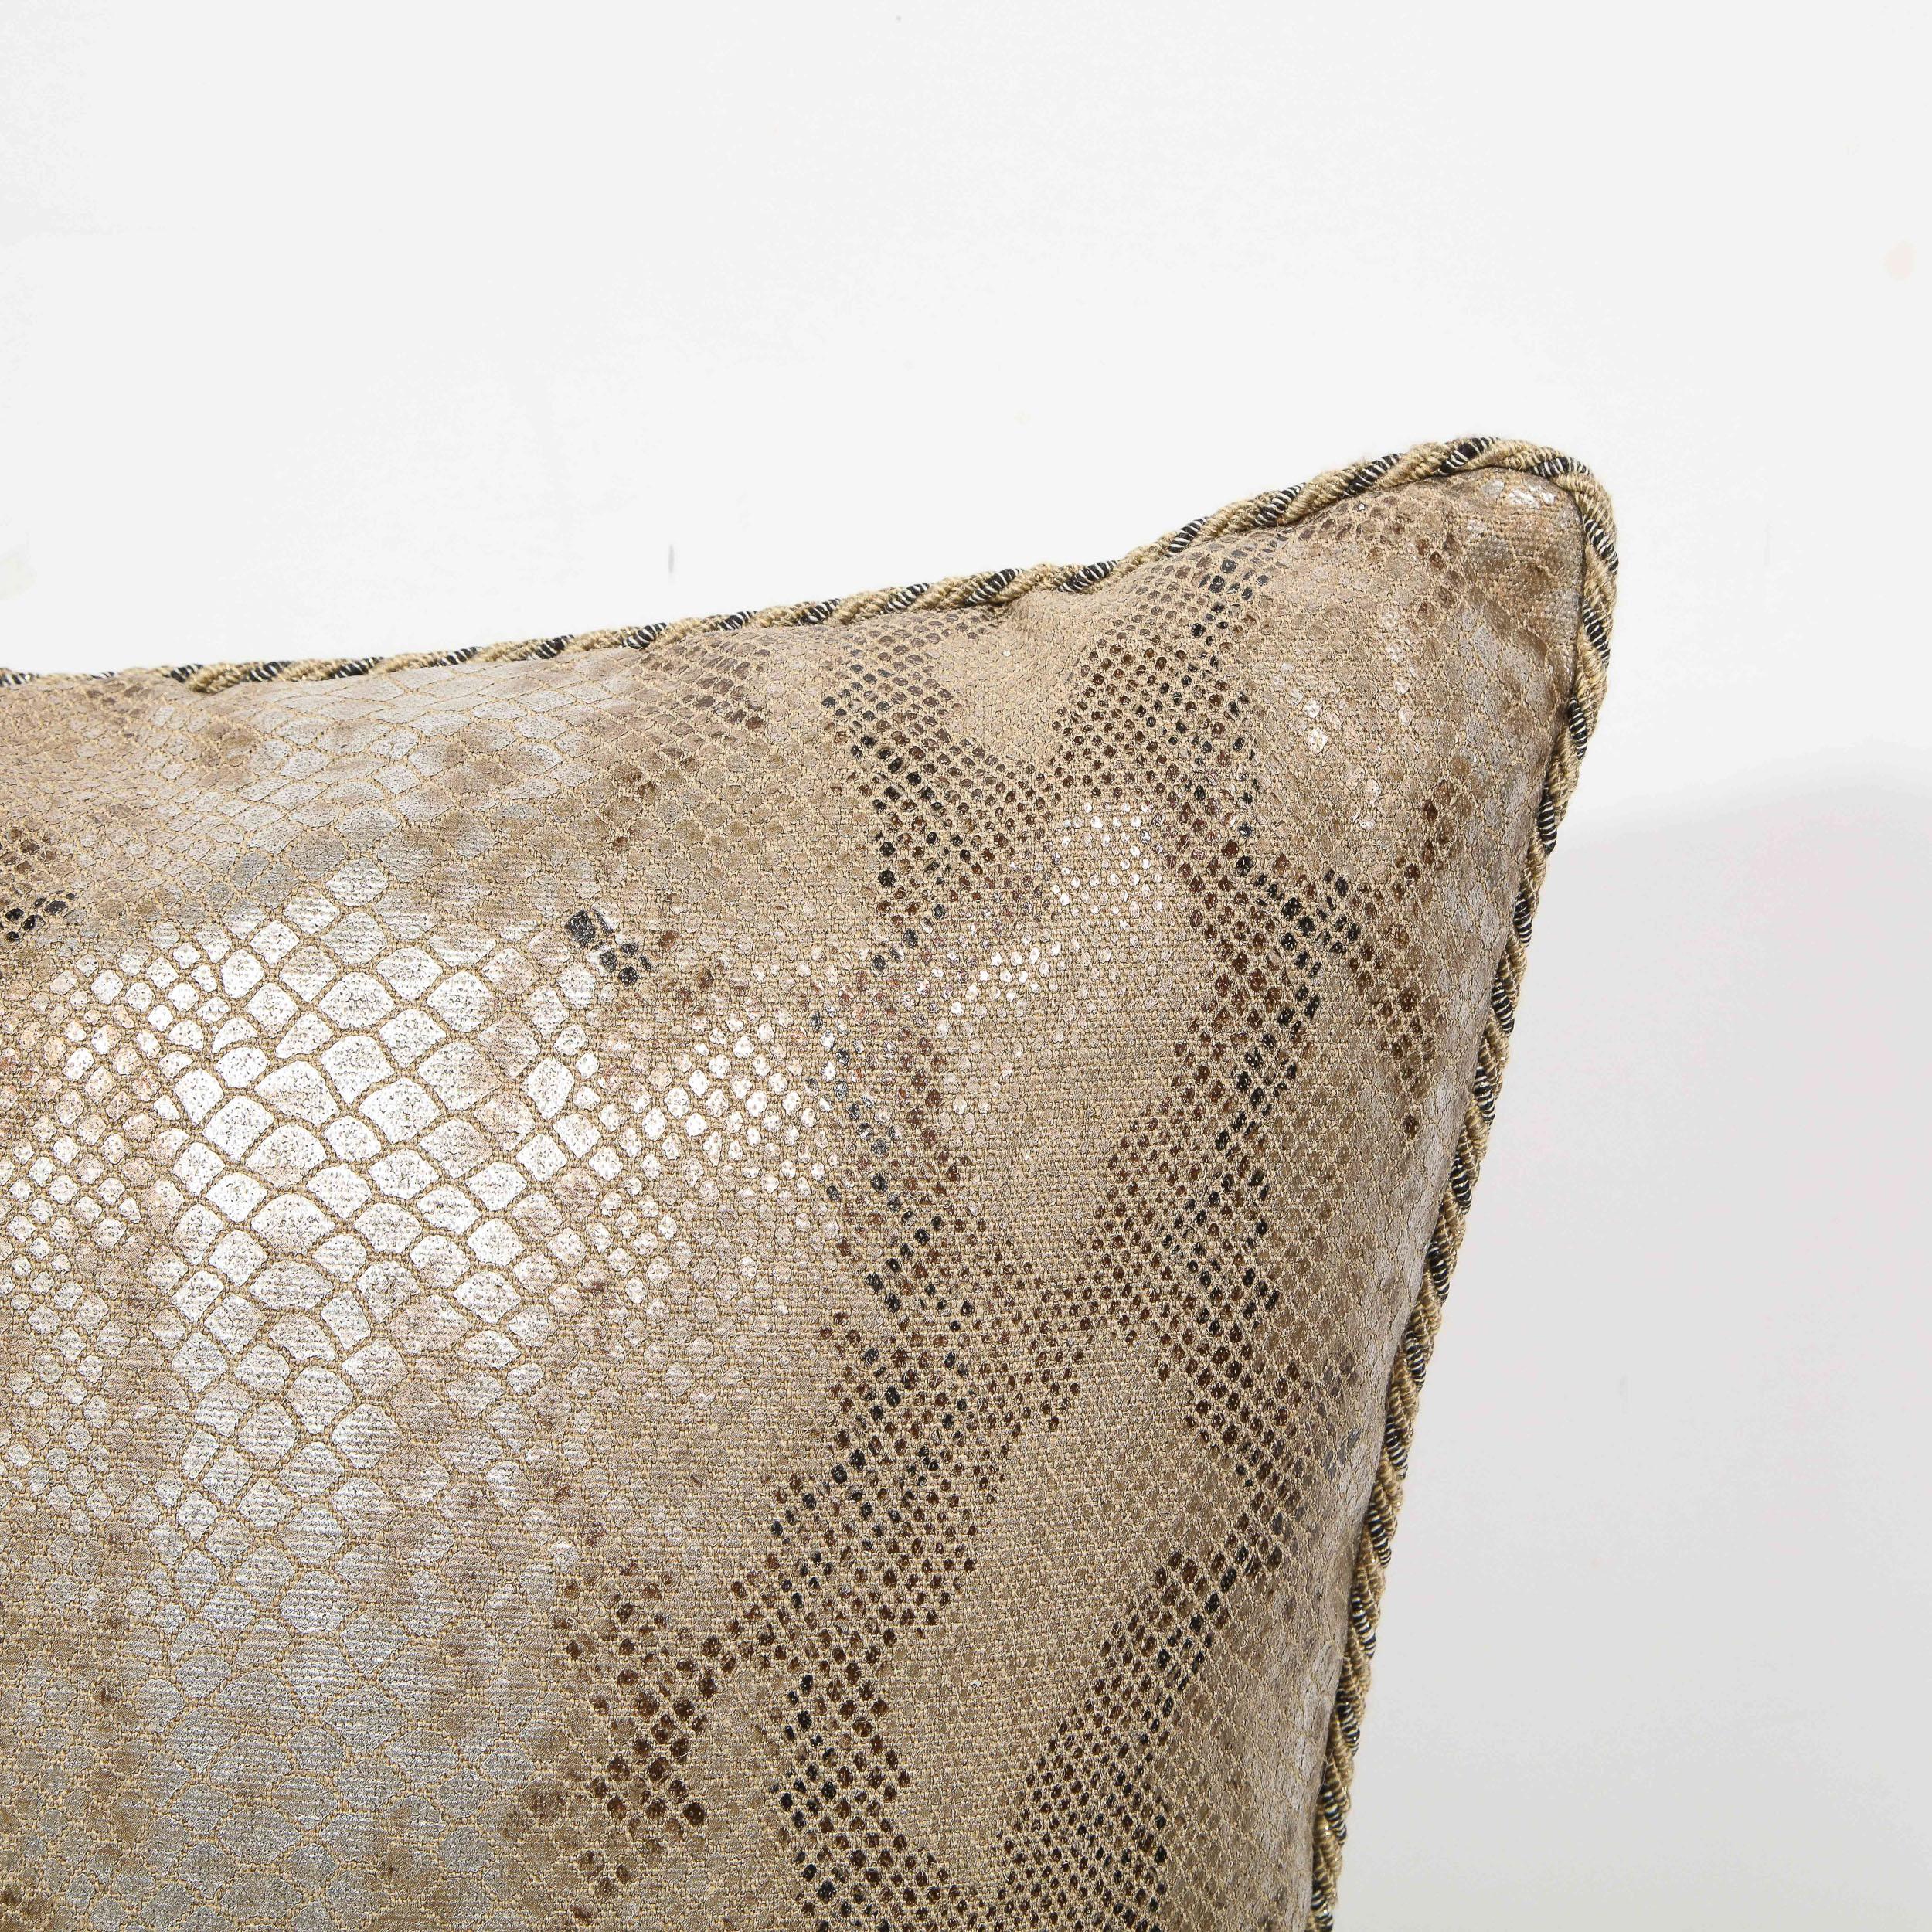 Modernist Iridescent Tan and Metallic Python Pattern Pillow with Helix Piping 4